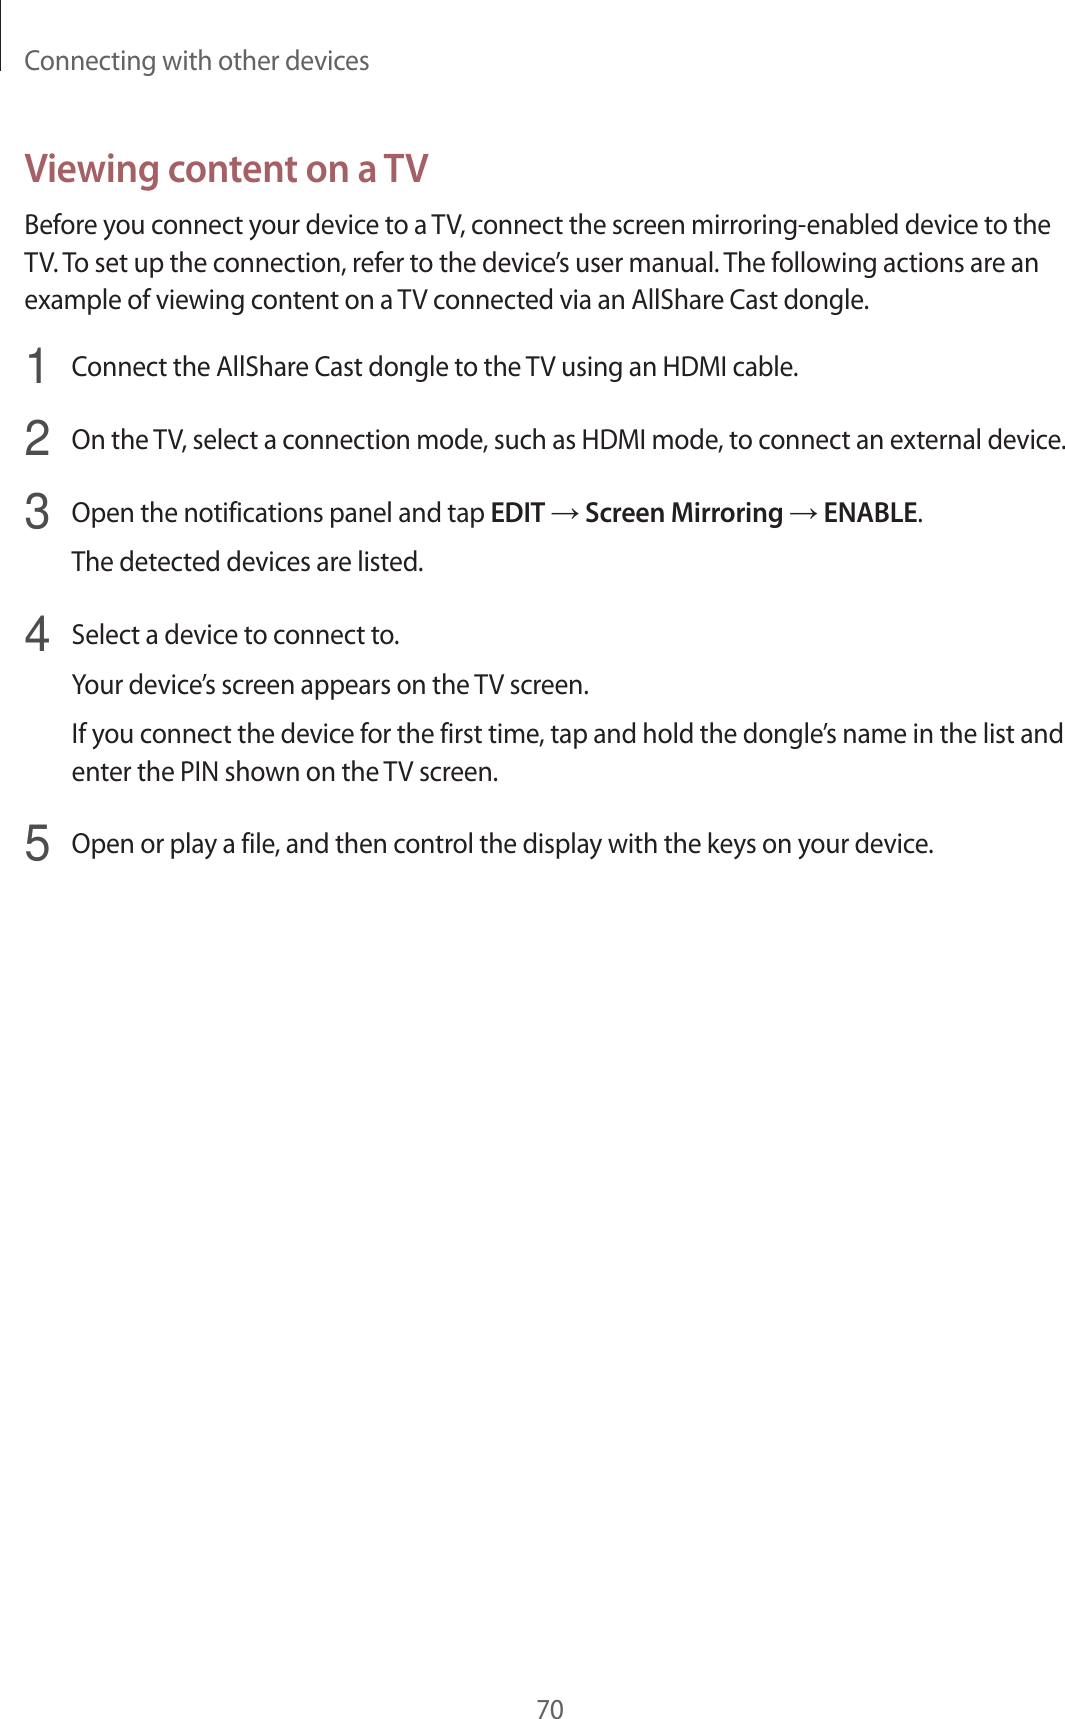 Connecting with other devices70Viewing content on a TVBefore you connect your device to a TV, connect the screen mirroring-enabled device to the TV. To set up the connection, refer to the device’s user manual. The following actions are an example of viewing content on a TV connected via an AllShare Cast dongle.1  Connect the AllShare Cast dongle to the TV using an HDMI cable.2  On the TV, select a connection mode, such as HDMI mode, to connect an external device.3  Open the notifications panel and tap EDIT → Screen Mirroring → ENABLE.The detected devices are listed.4  Select a device to connect to.Your device’s screen appears on the TV screen.If you connect the device for the first time, tap and hold the dongle’s name in the list and enter the PIN shown on the TV screen.5  Open or play a file, and then control the display with the keys on your device.